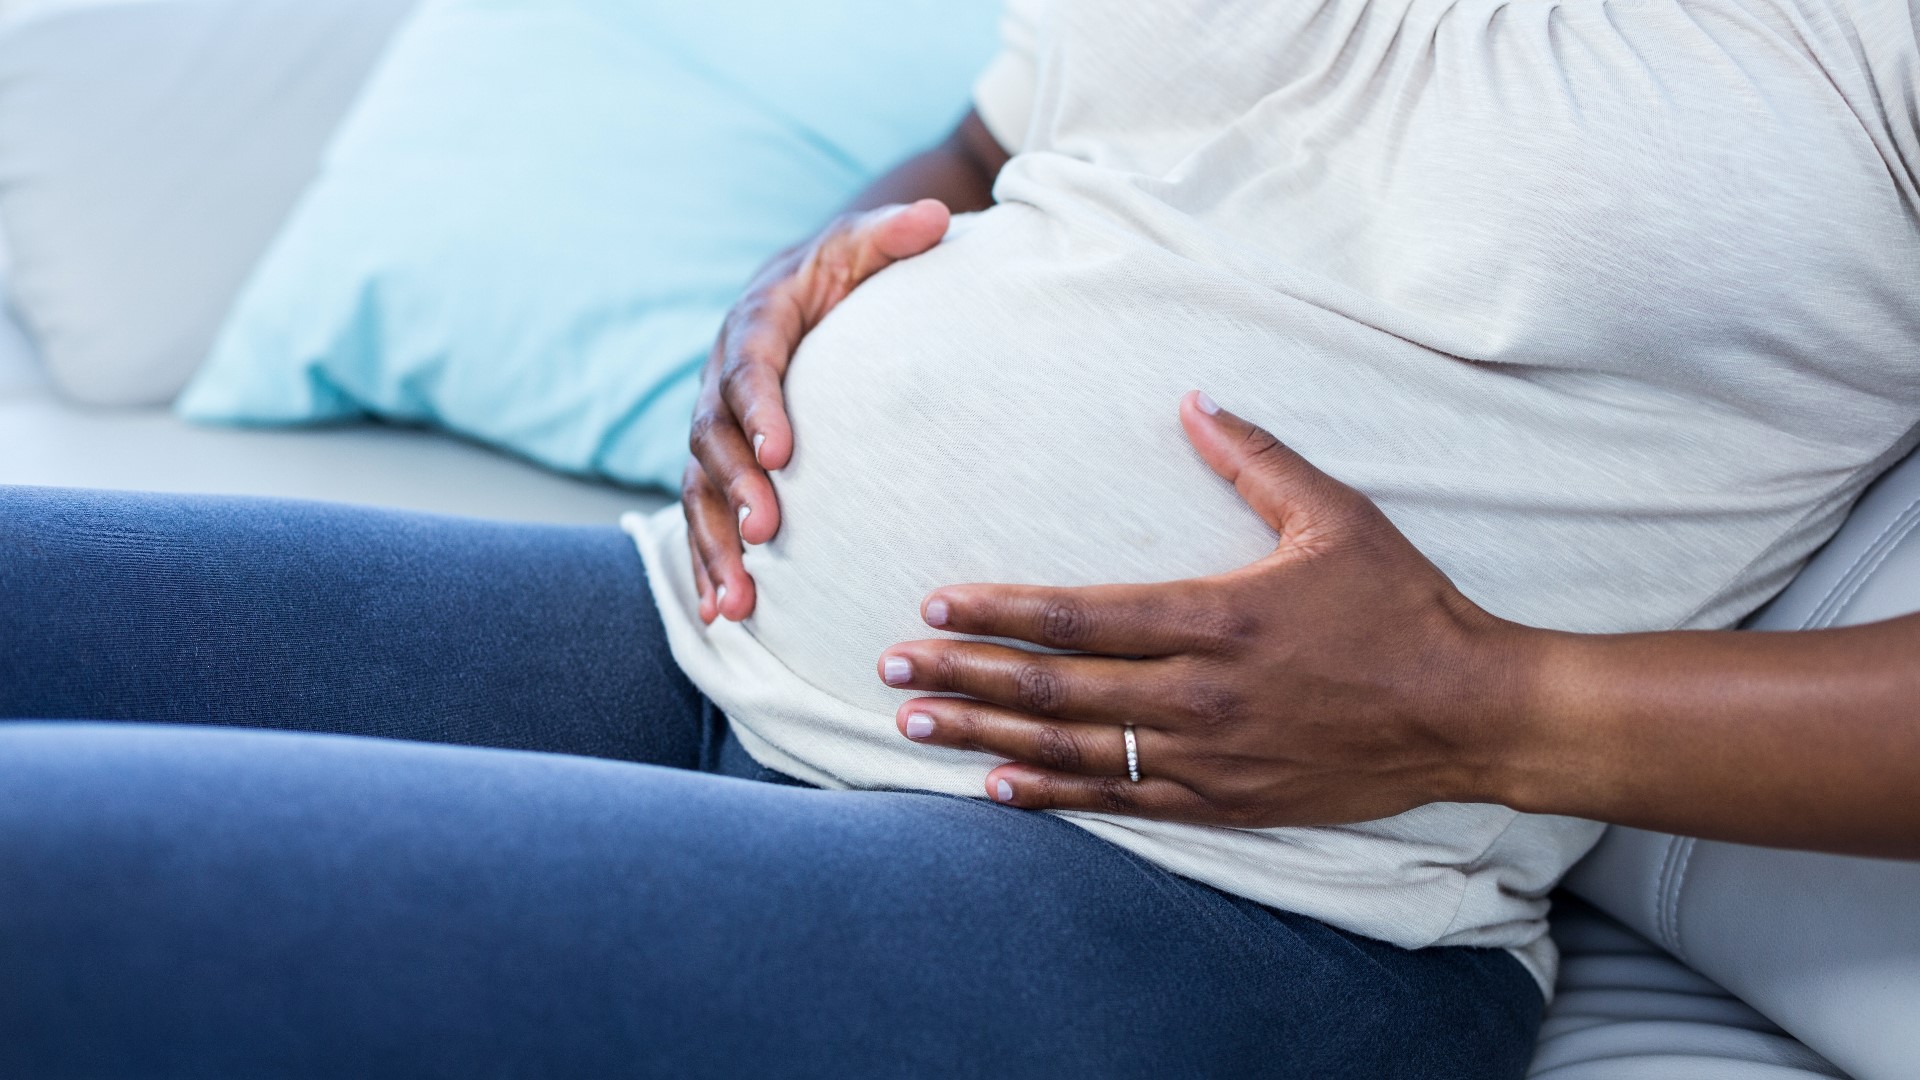 The study found a lack of accommodations for pregnant women—which could lead to poor health outcomes—was quite common and that health care itself had barriers, too.